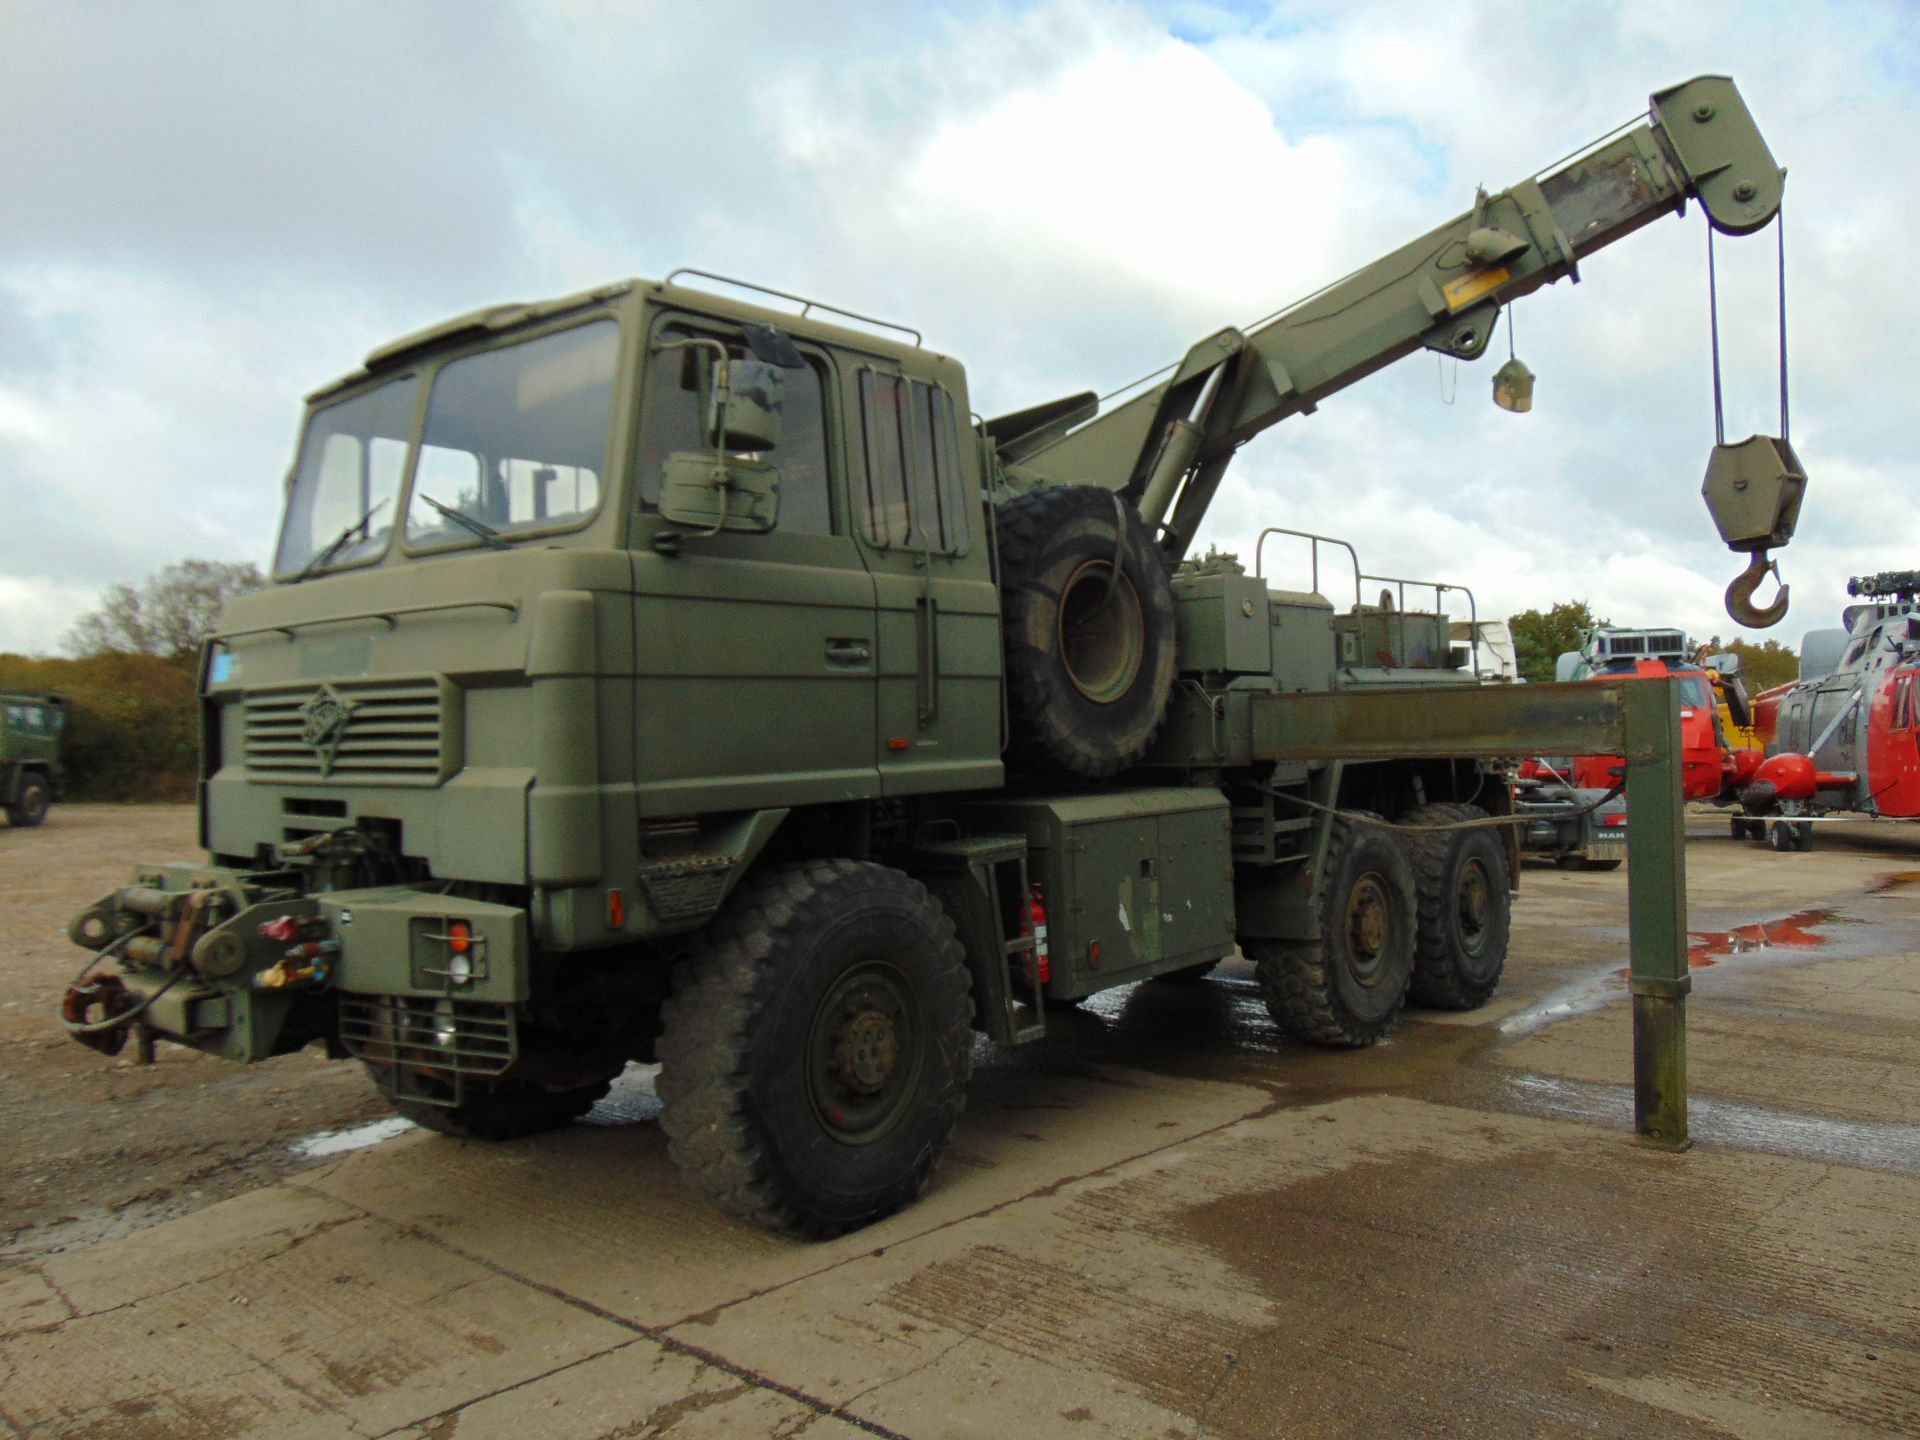 Foden 6x6 Recovery Vehicle which is Complete with Remotes and EKA Recovery Tools